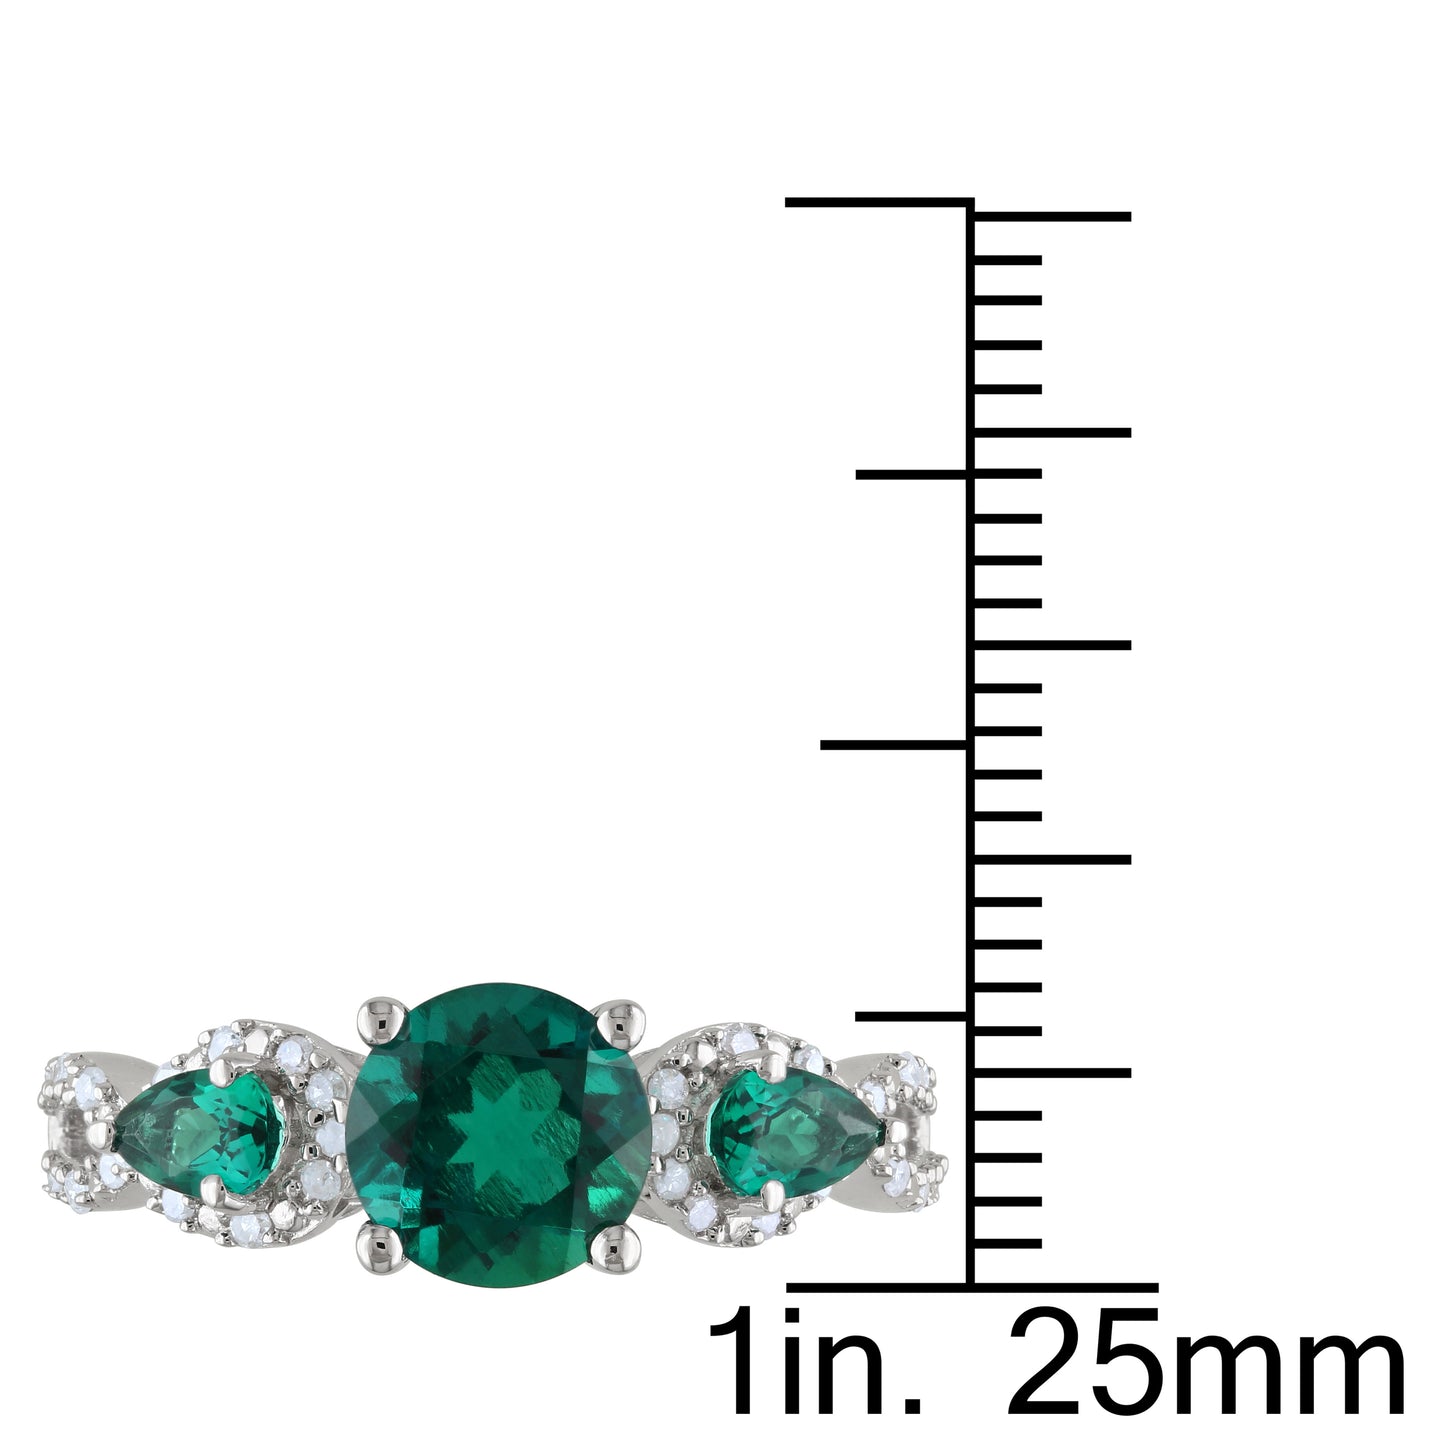 Created Emerald & Diamdon Three Stone Ring in Sterling Silver